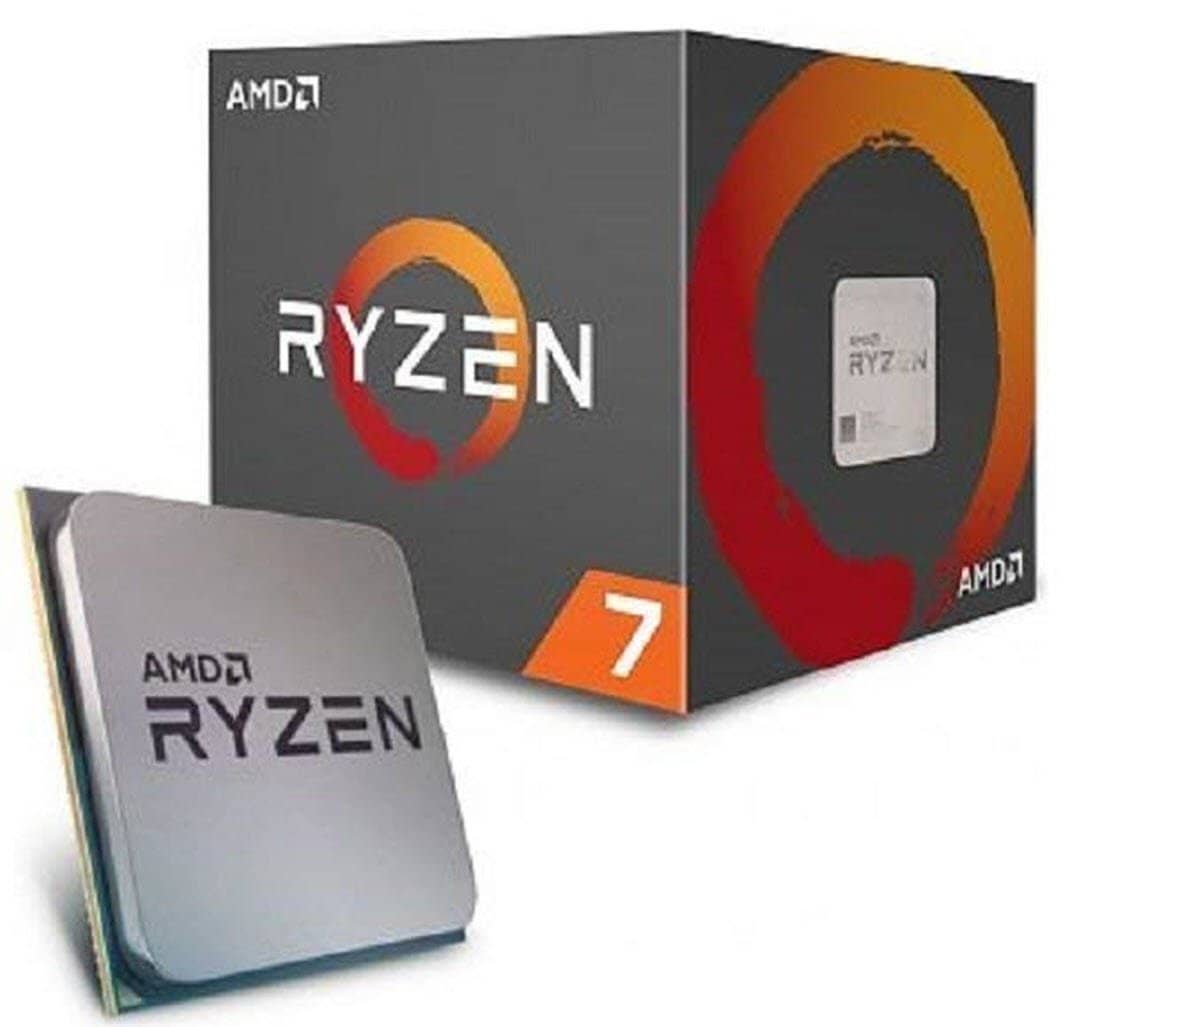 AMD YD1700BBAEBOX Ryzen 7 1700 Processor with Wraith Spire LED Cooler & ASUS PRIME X370-PRO Motherboard